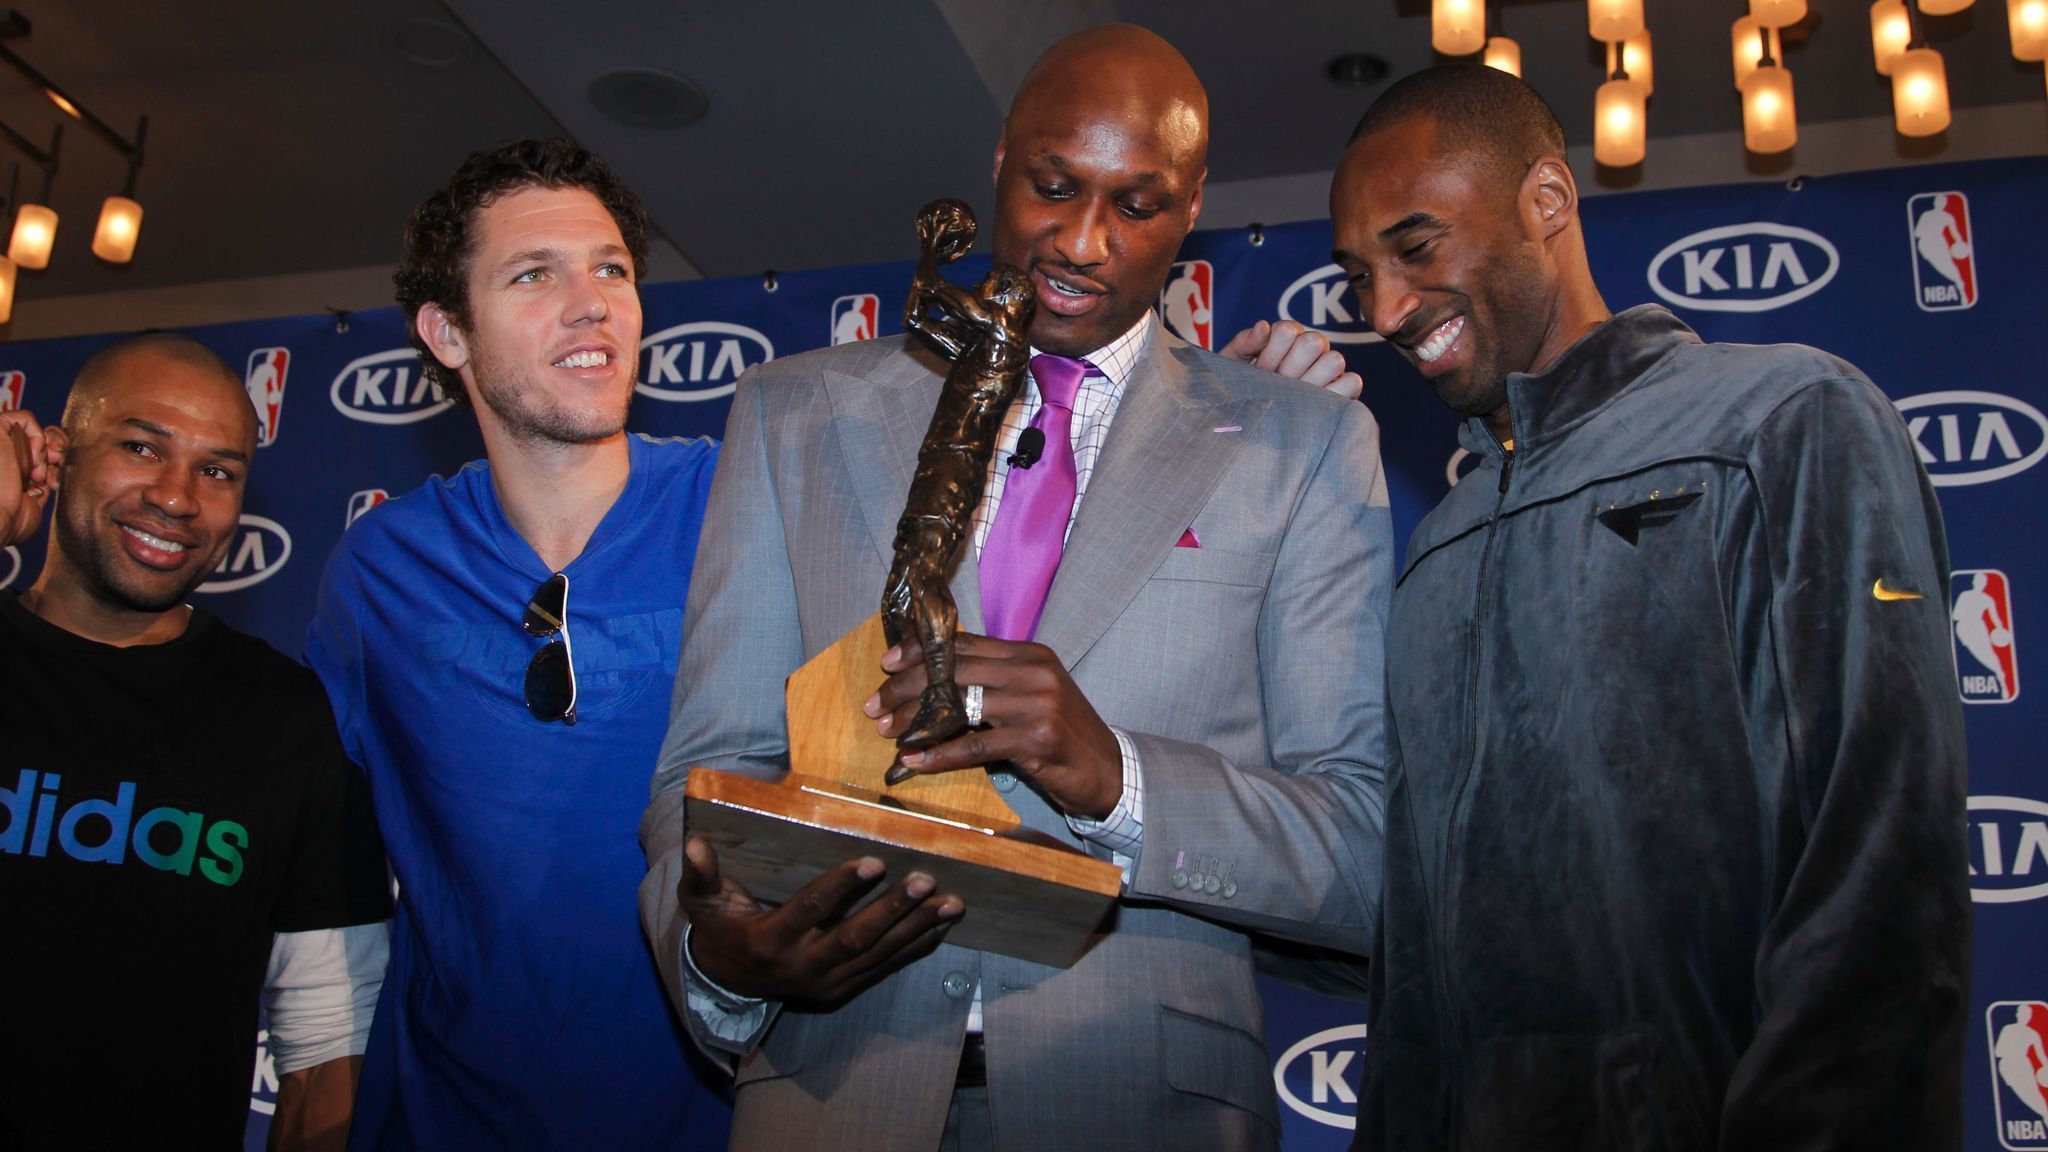 Lamar Odom: 'That trade from the Lakers basically ended my career and purpose' - LA Times2048 x 1152